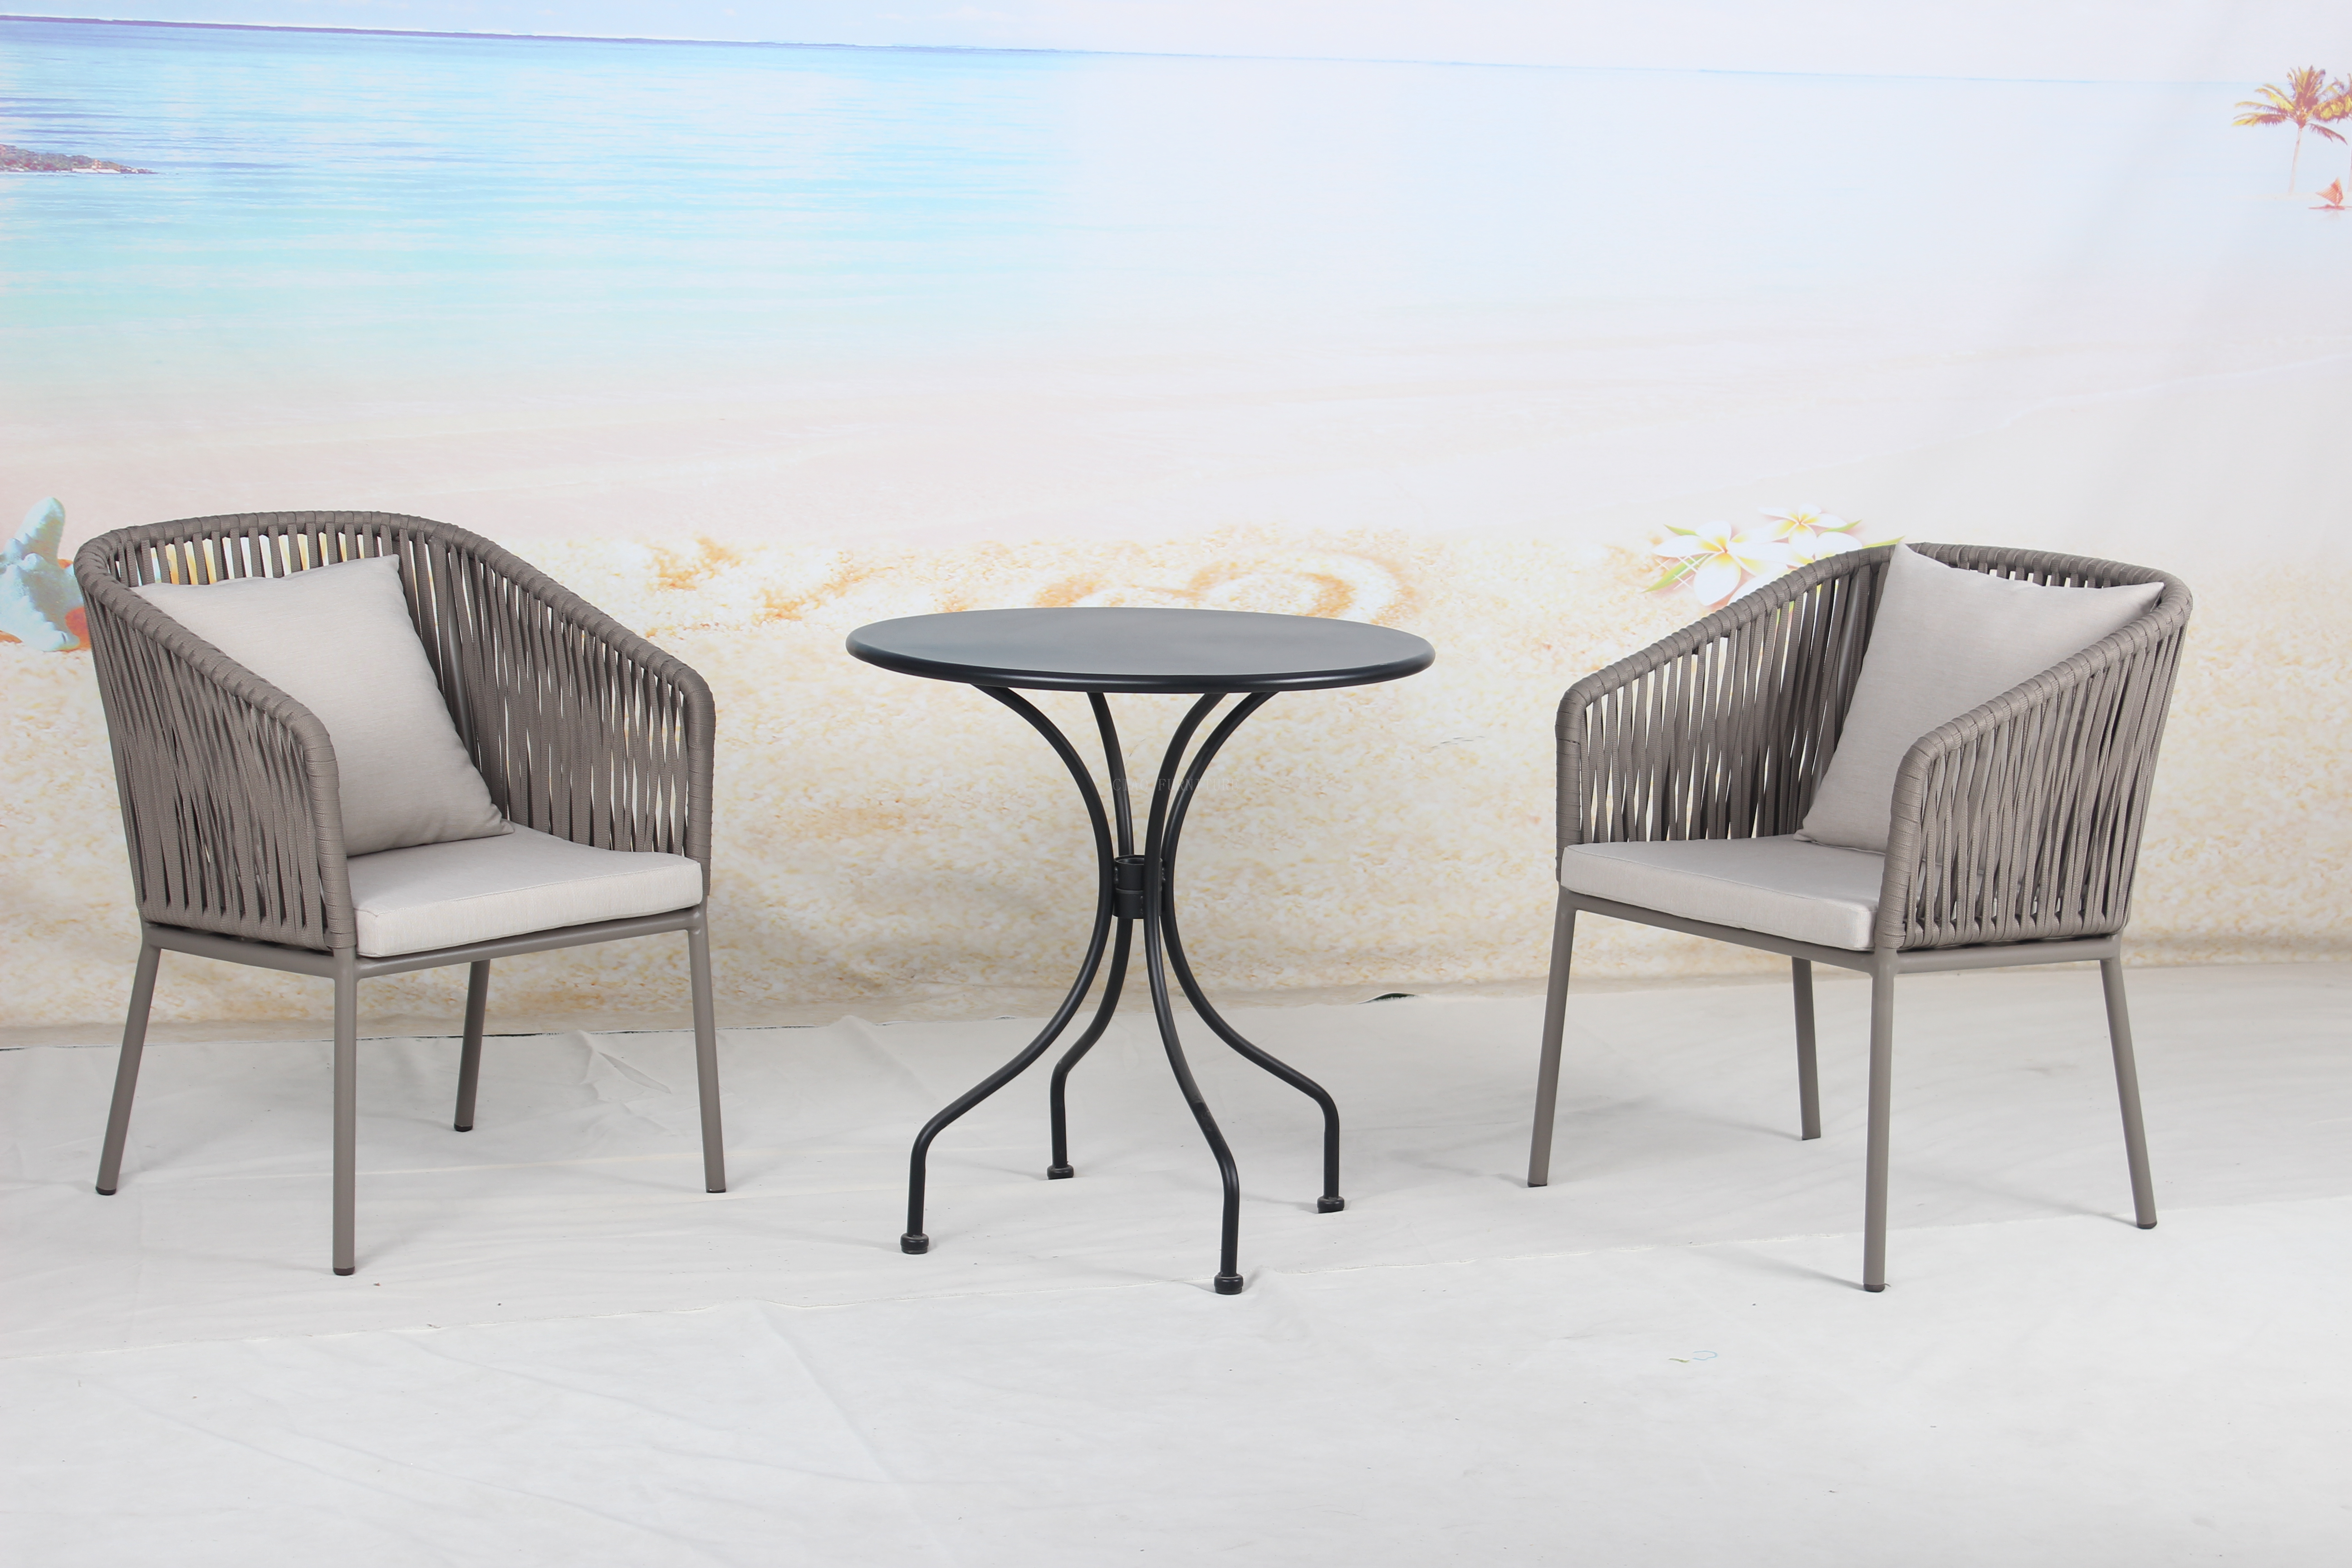 Outdoor garden aluminum table and chairs